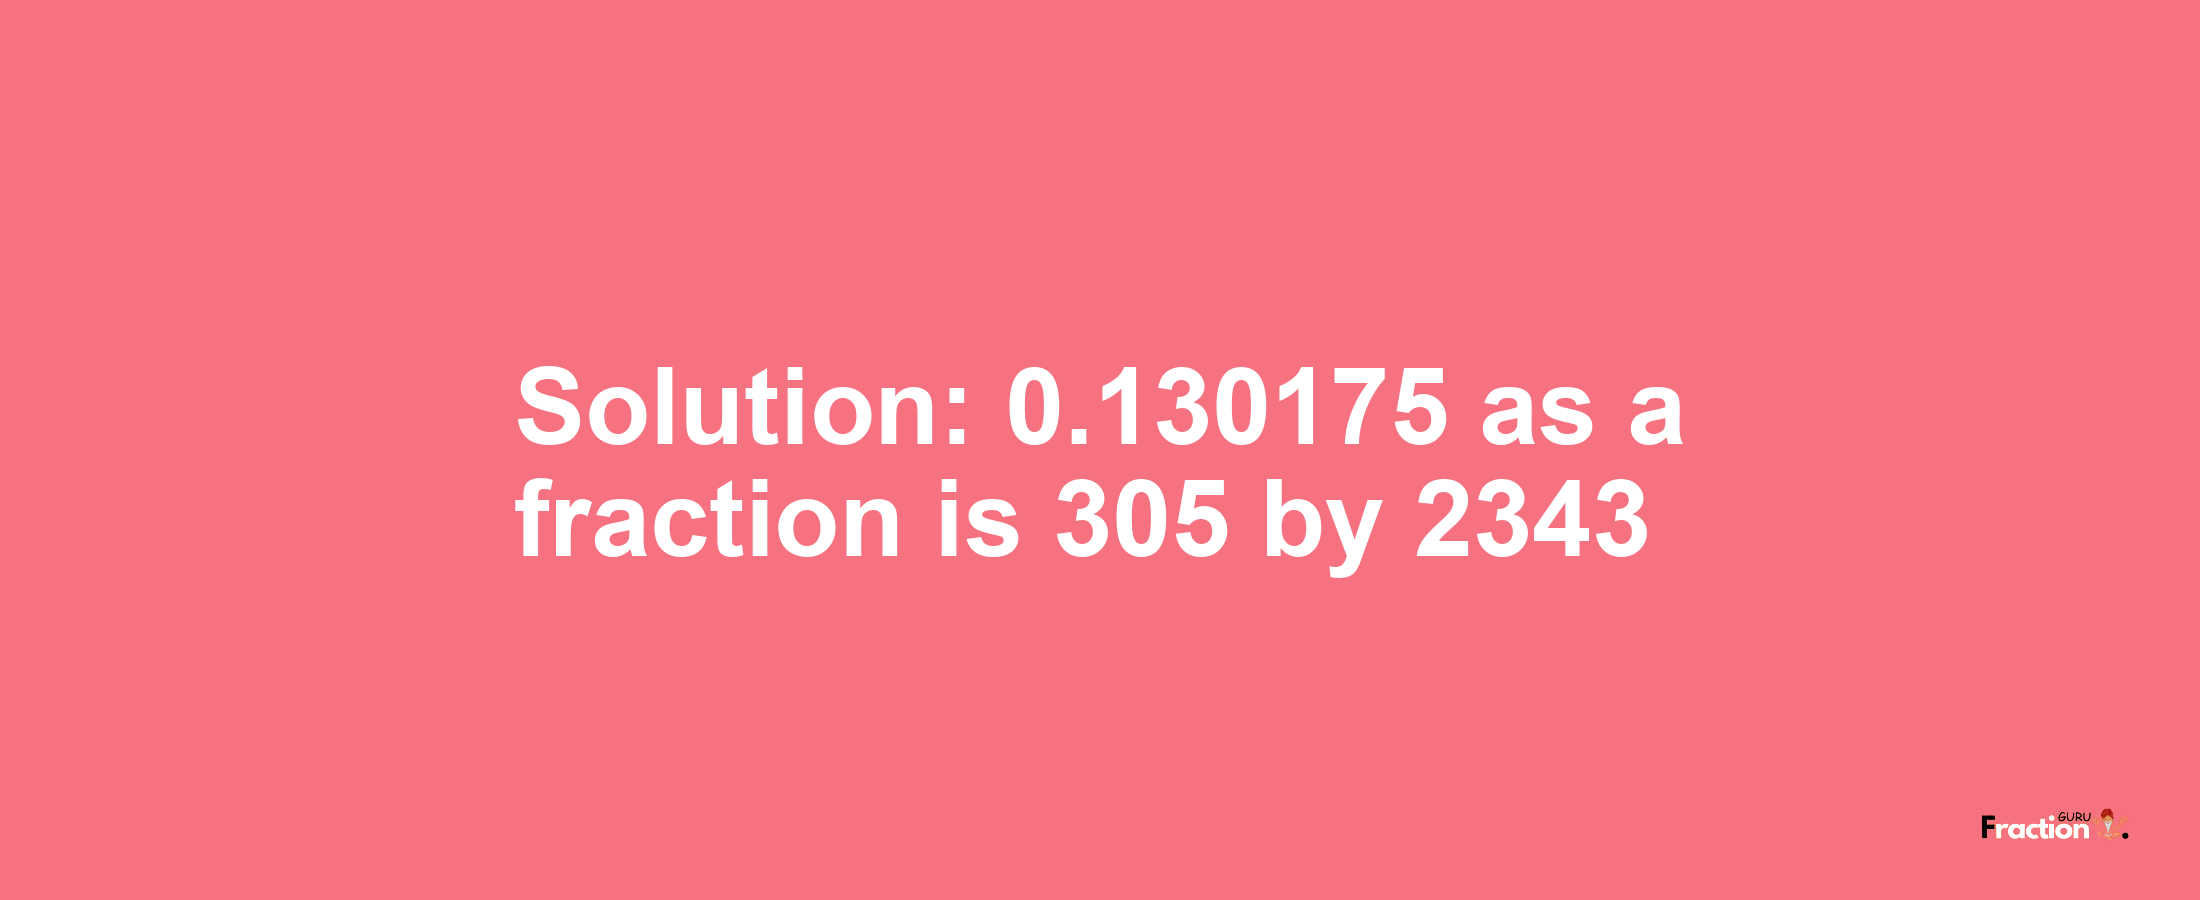 Solution:0.130175 as a fraction is 305/2343